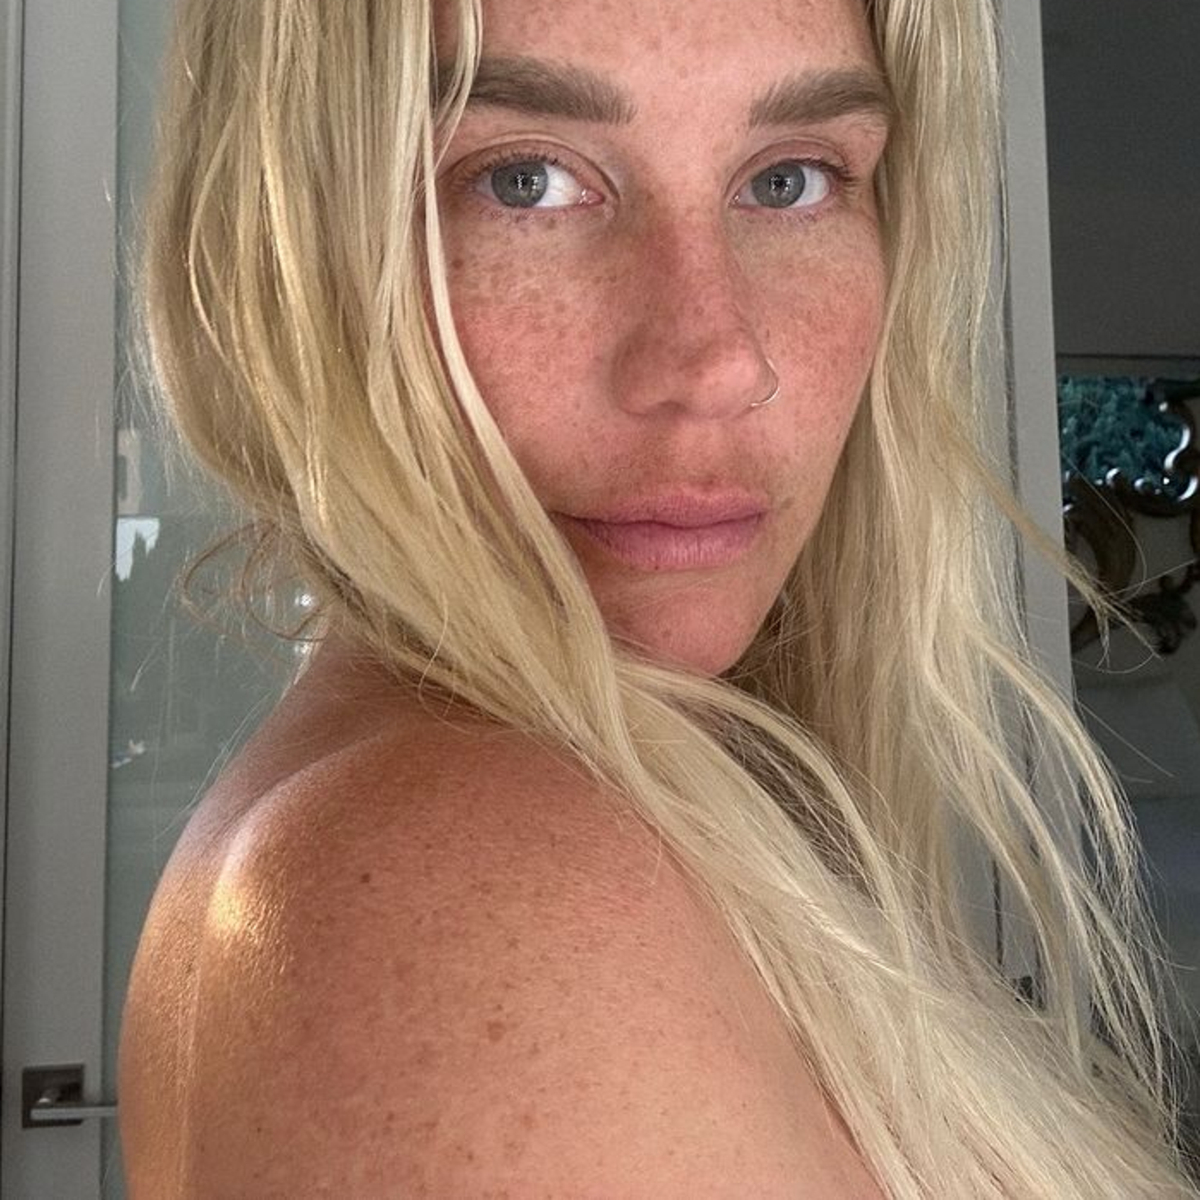 Kesha Leaves Little to the Imagination With Free the Nipple Moment